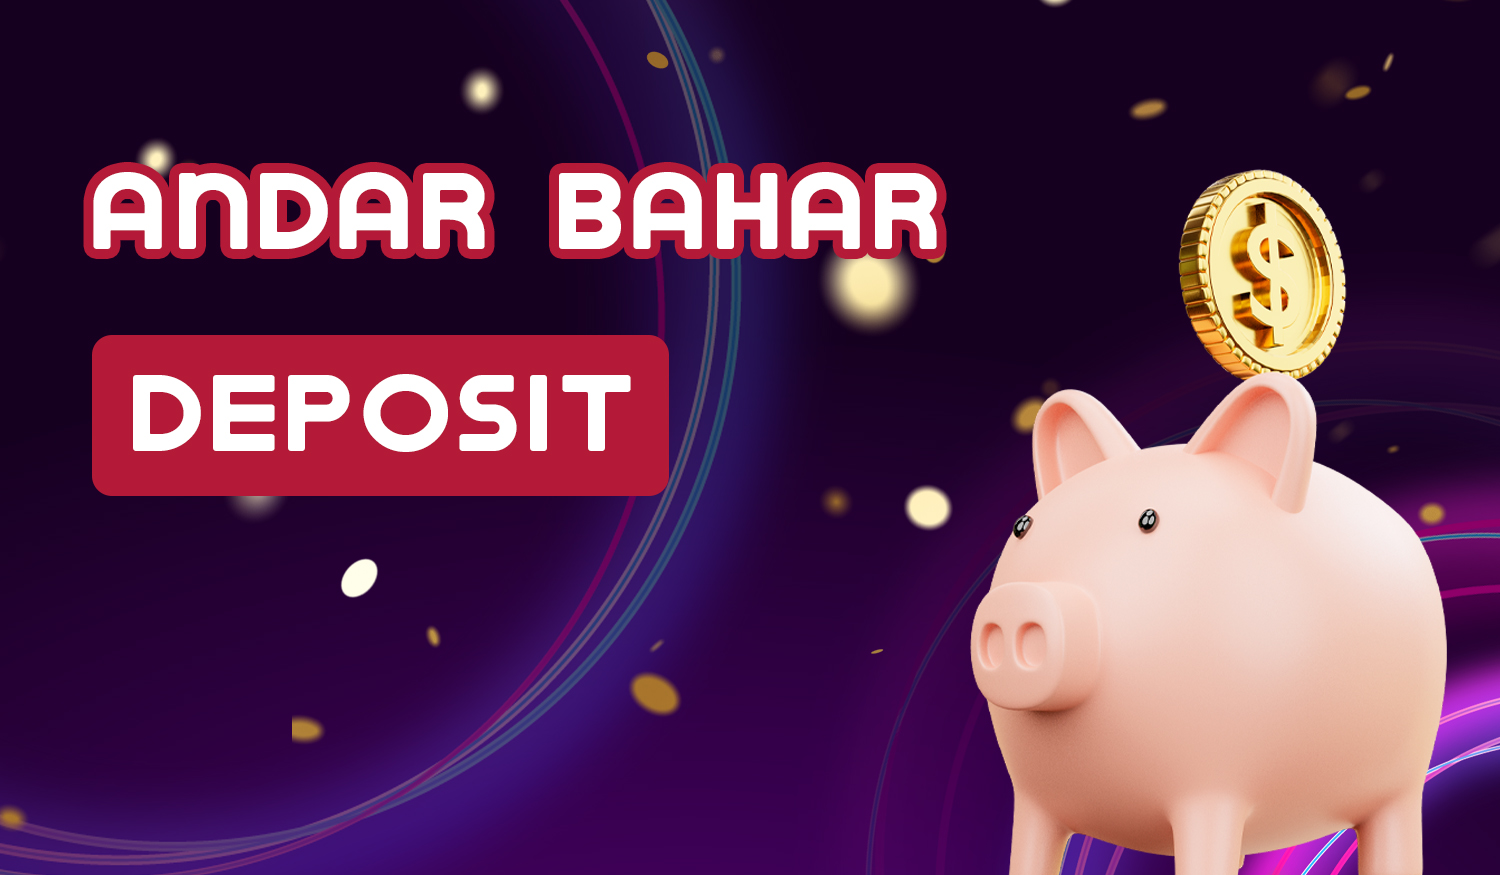 With what payment systems and for what amounts can be made a deposit to play Andar Bahar